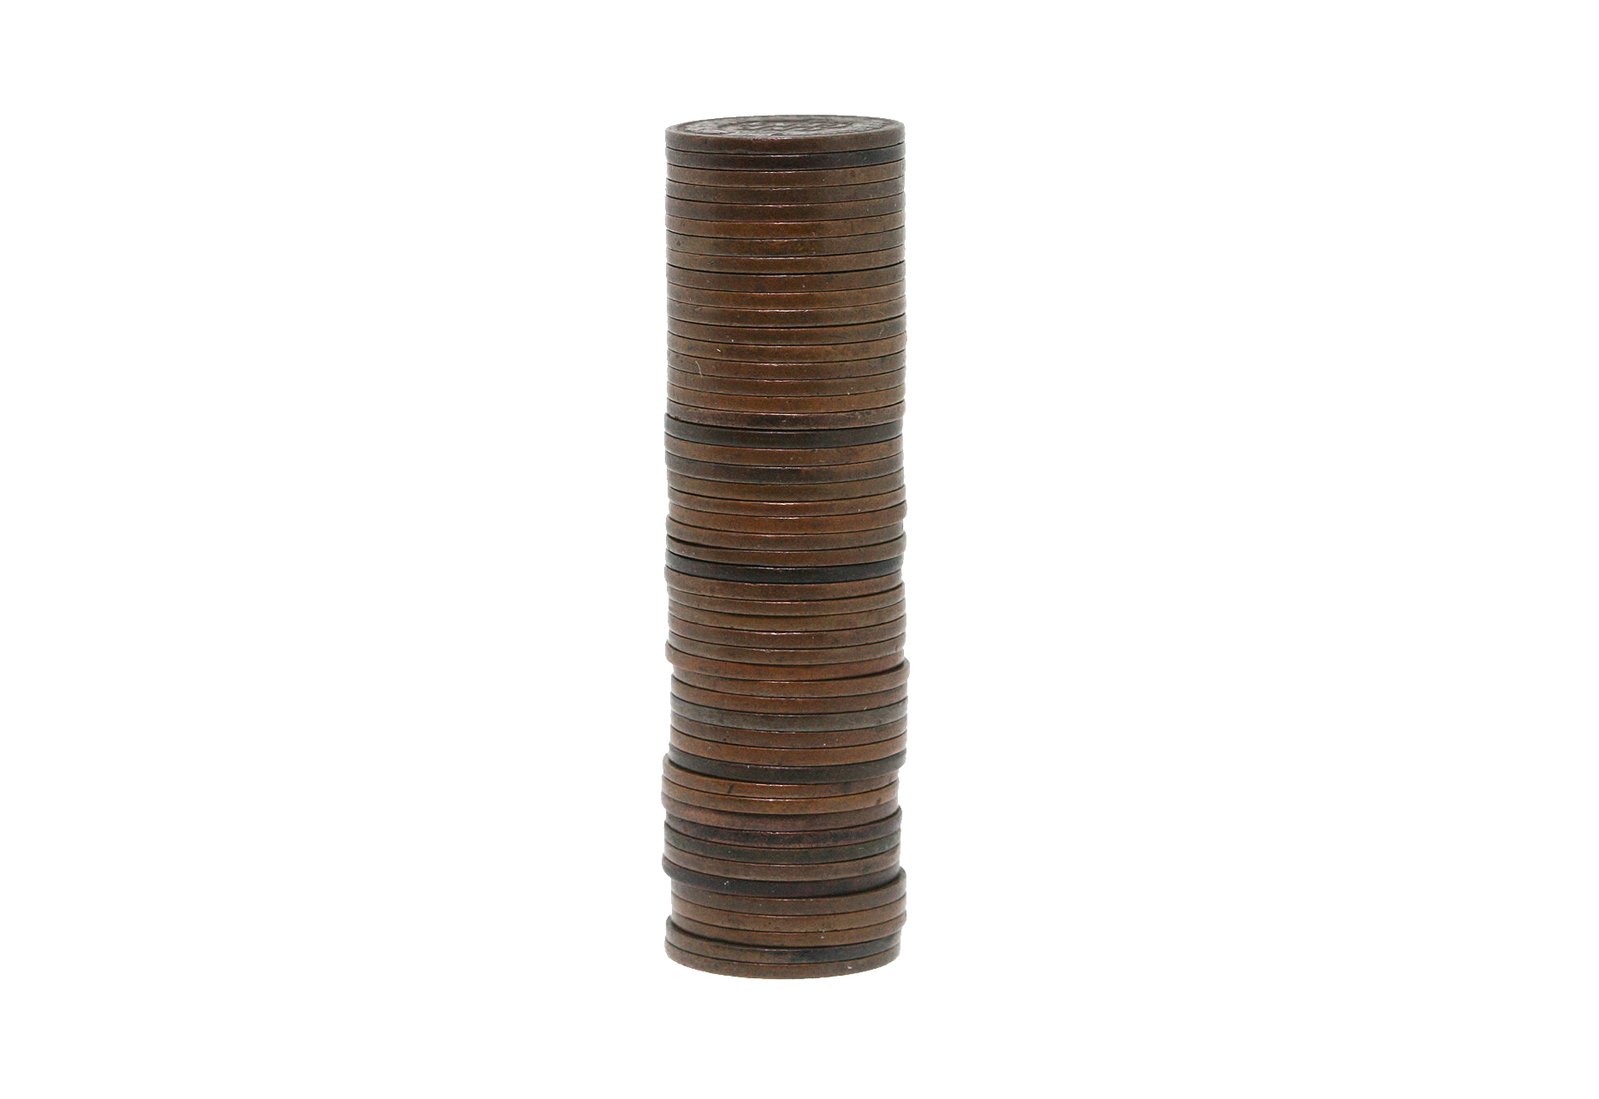 a stack of brown wooden coins stacked together